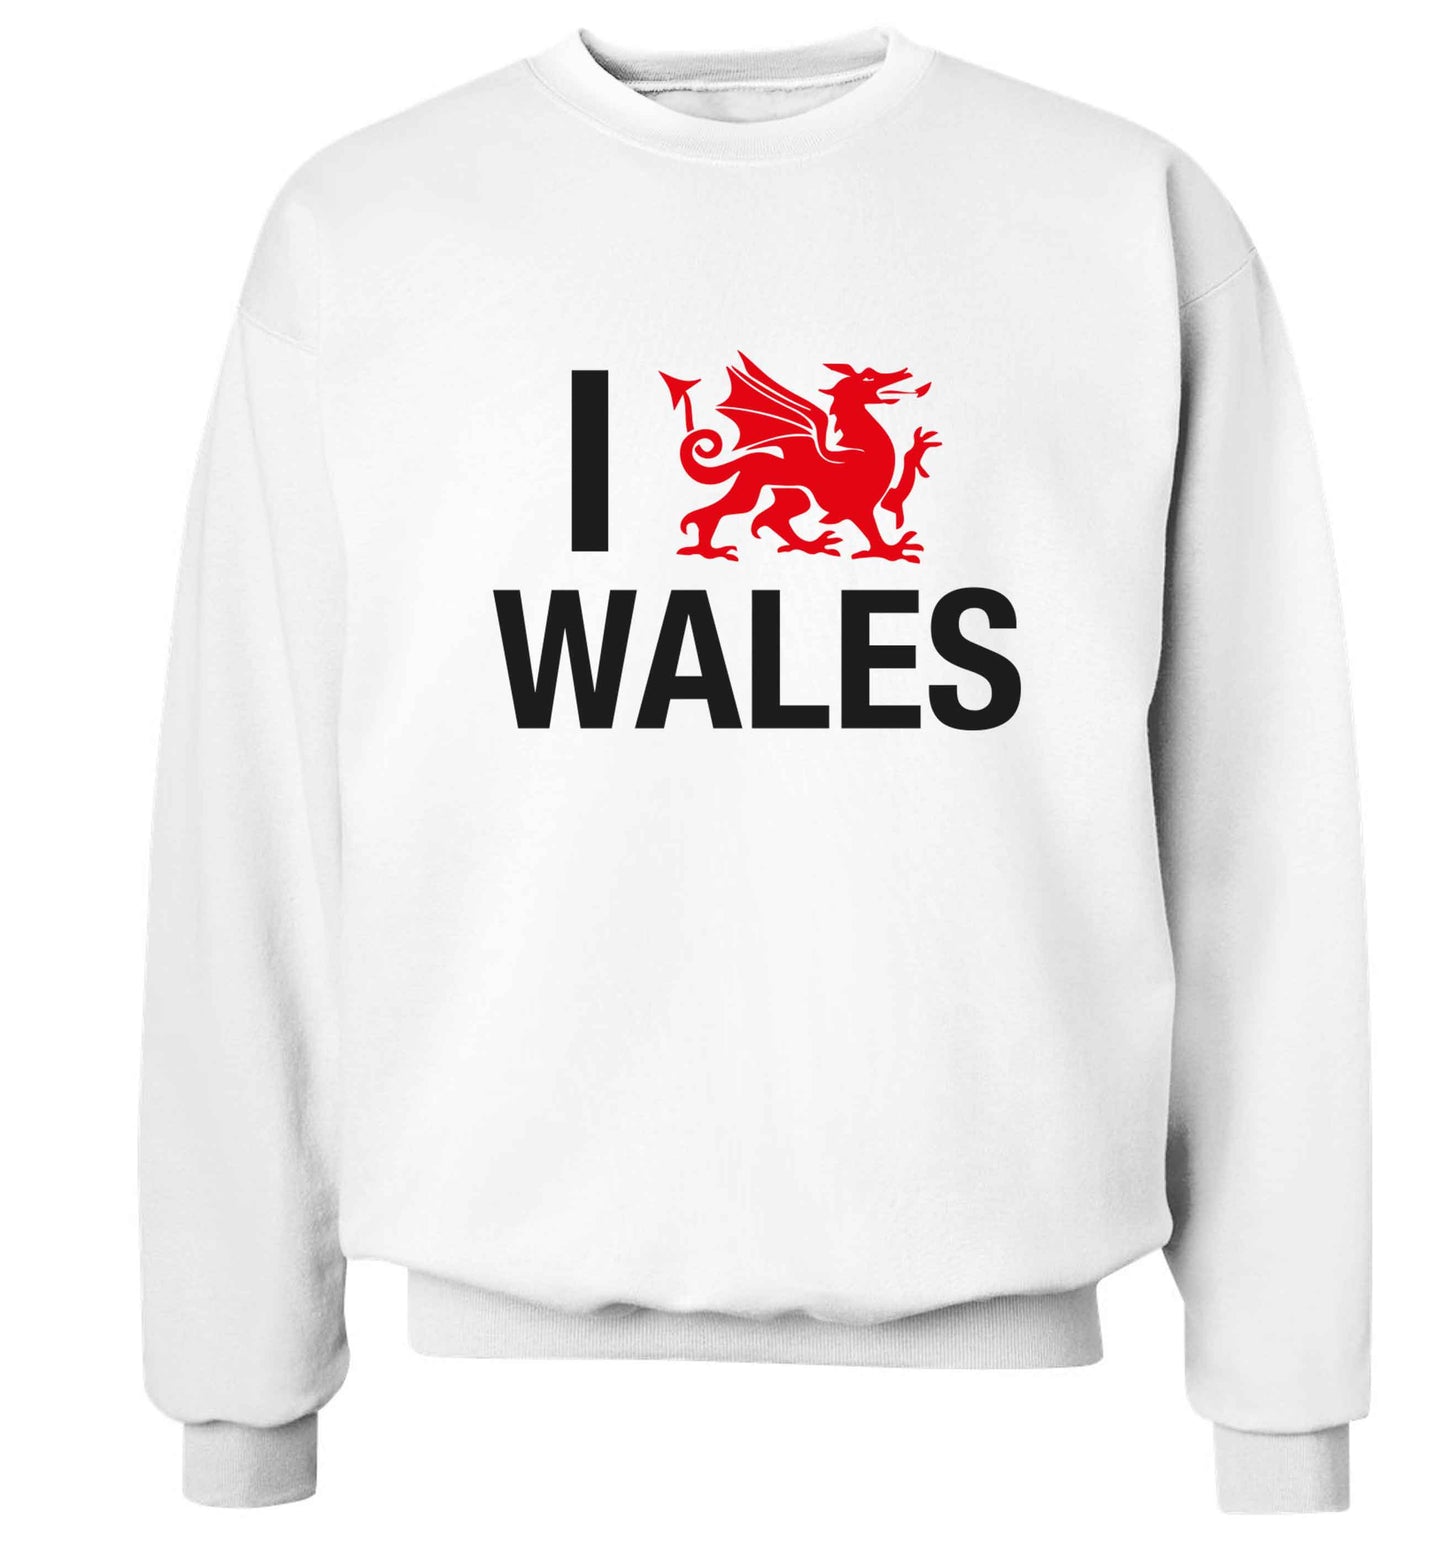 I love Wales Adult's unisex white Sweater 2XL